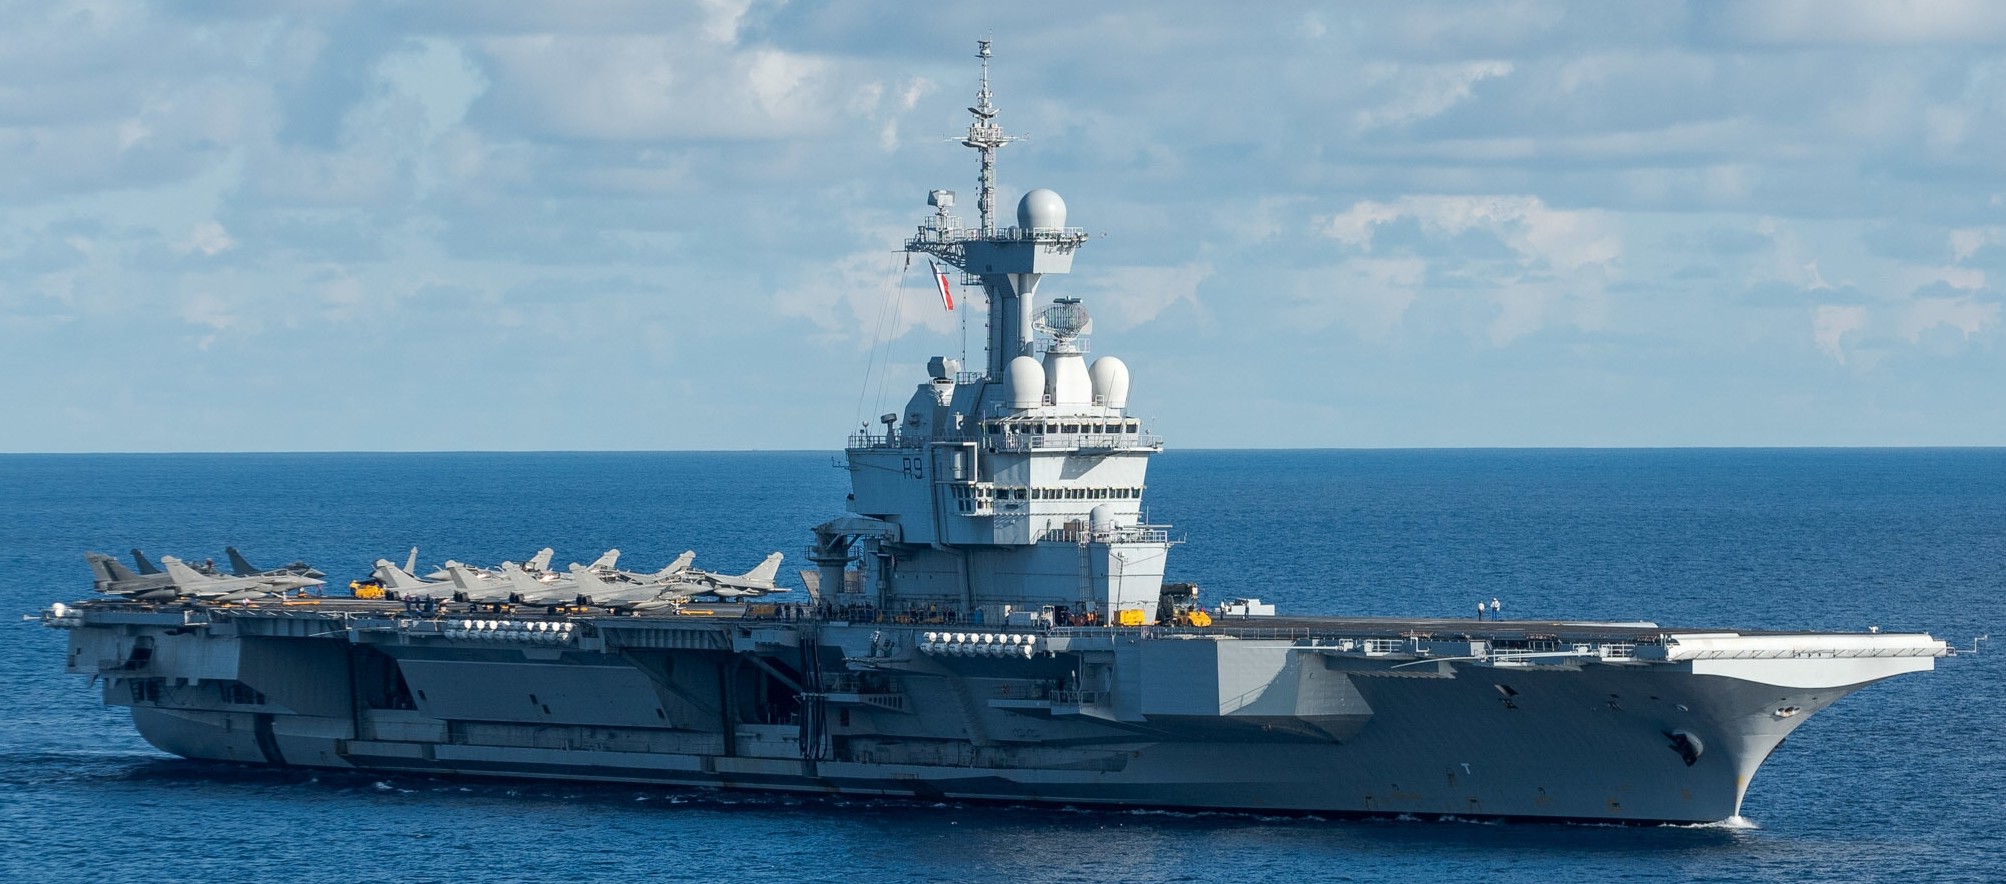 r-91 fs charles de gaulle aircraft carrier french navy marine nationale 60